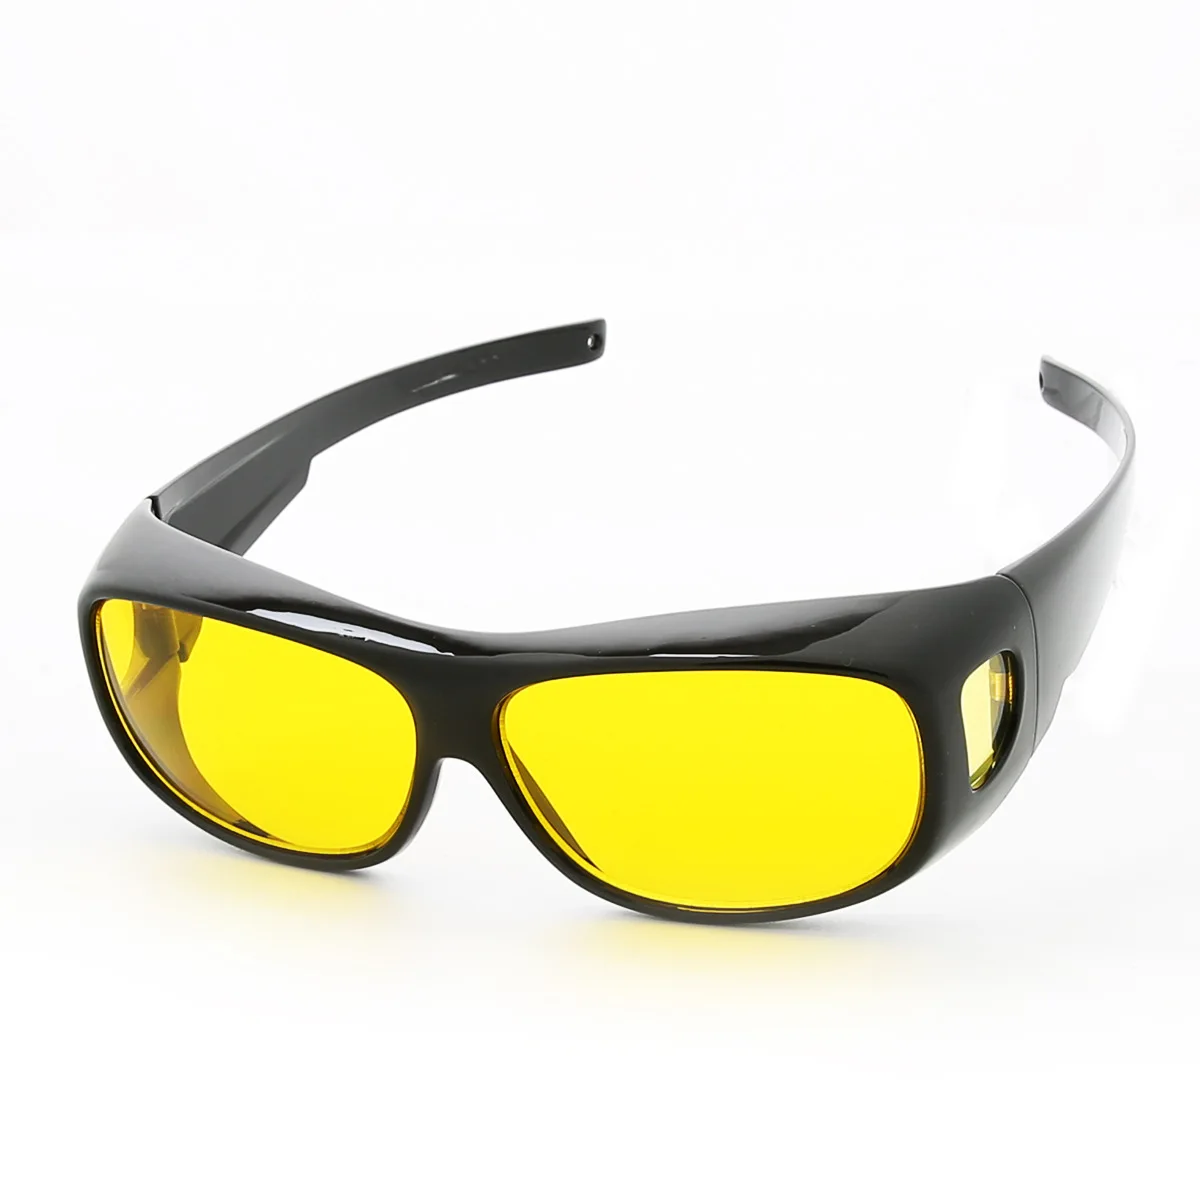 470 Laser Goggles Cover 200-490nm UV Blue Semiconductor Solid Laser Goggles